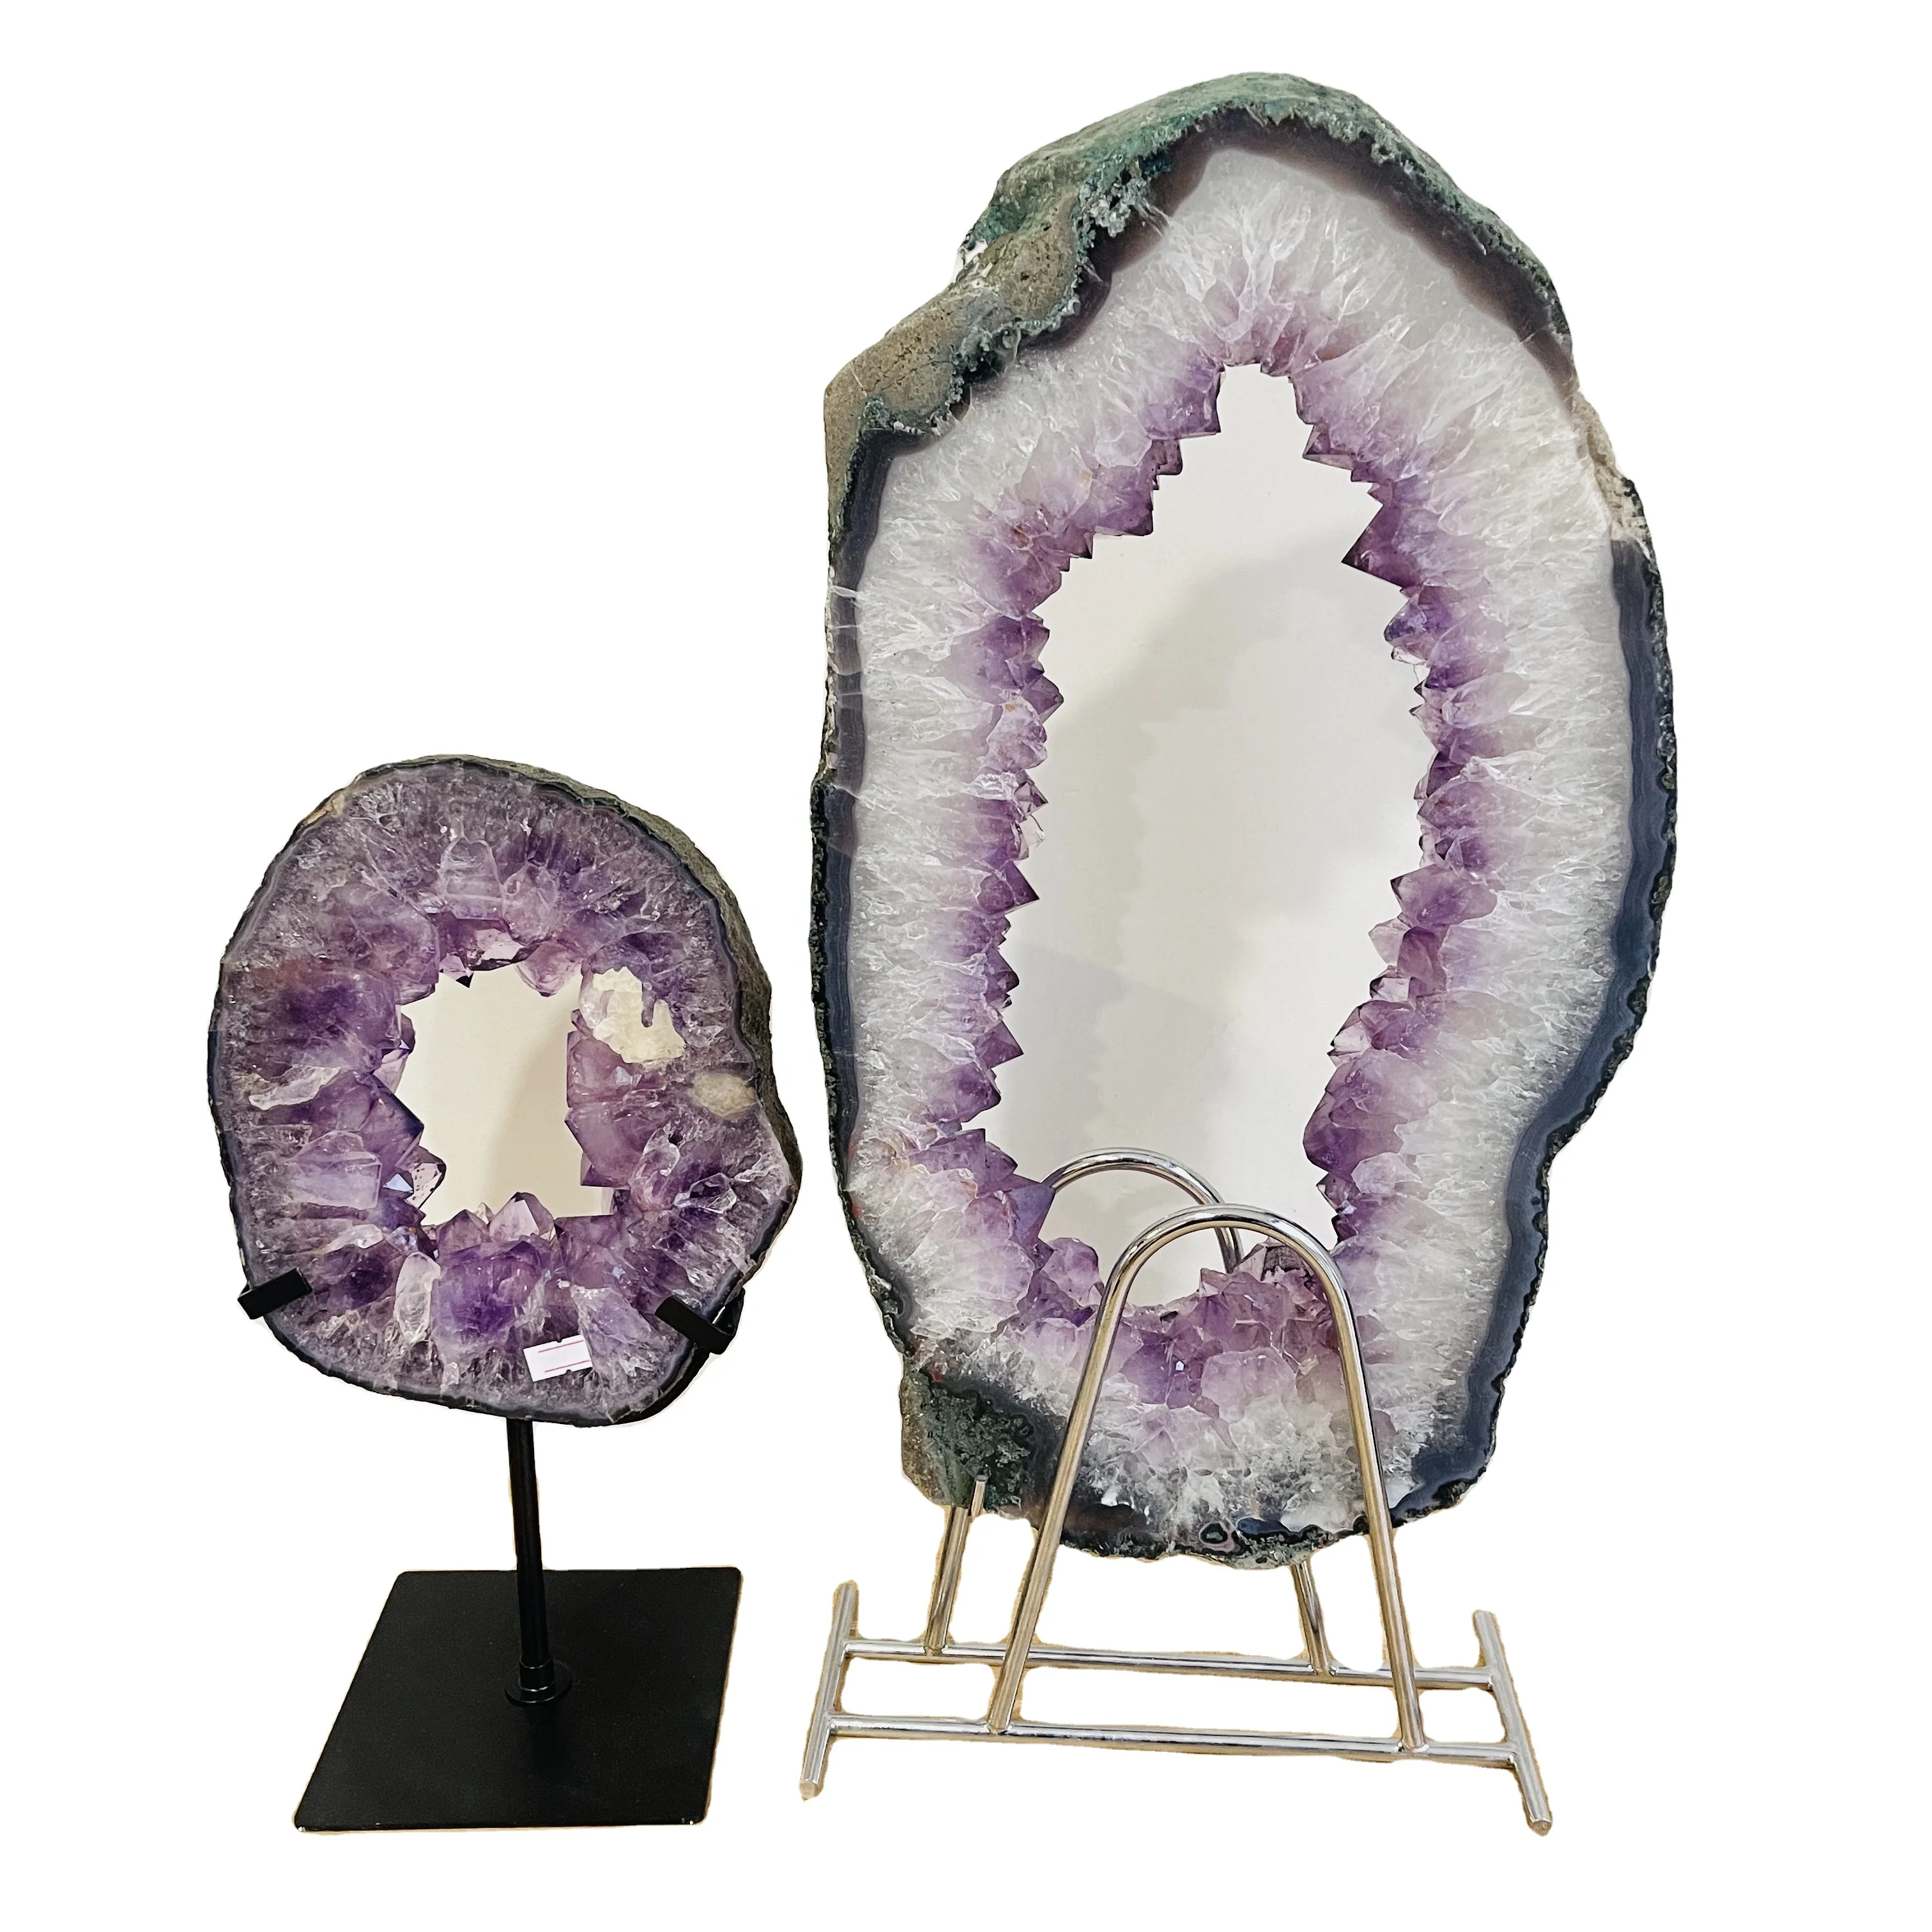 

Wholesale Natural Amethyst Cluster Crystal Amethyst Geode Slice With Stand For Home Decoration